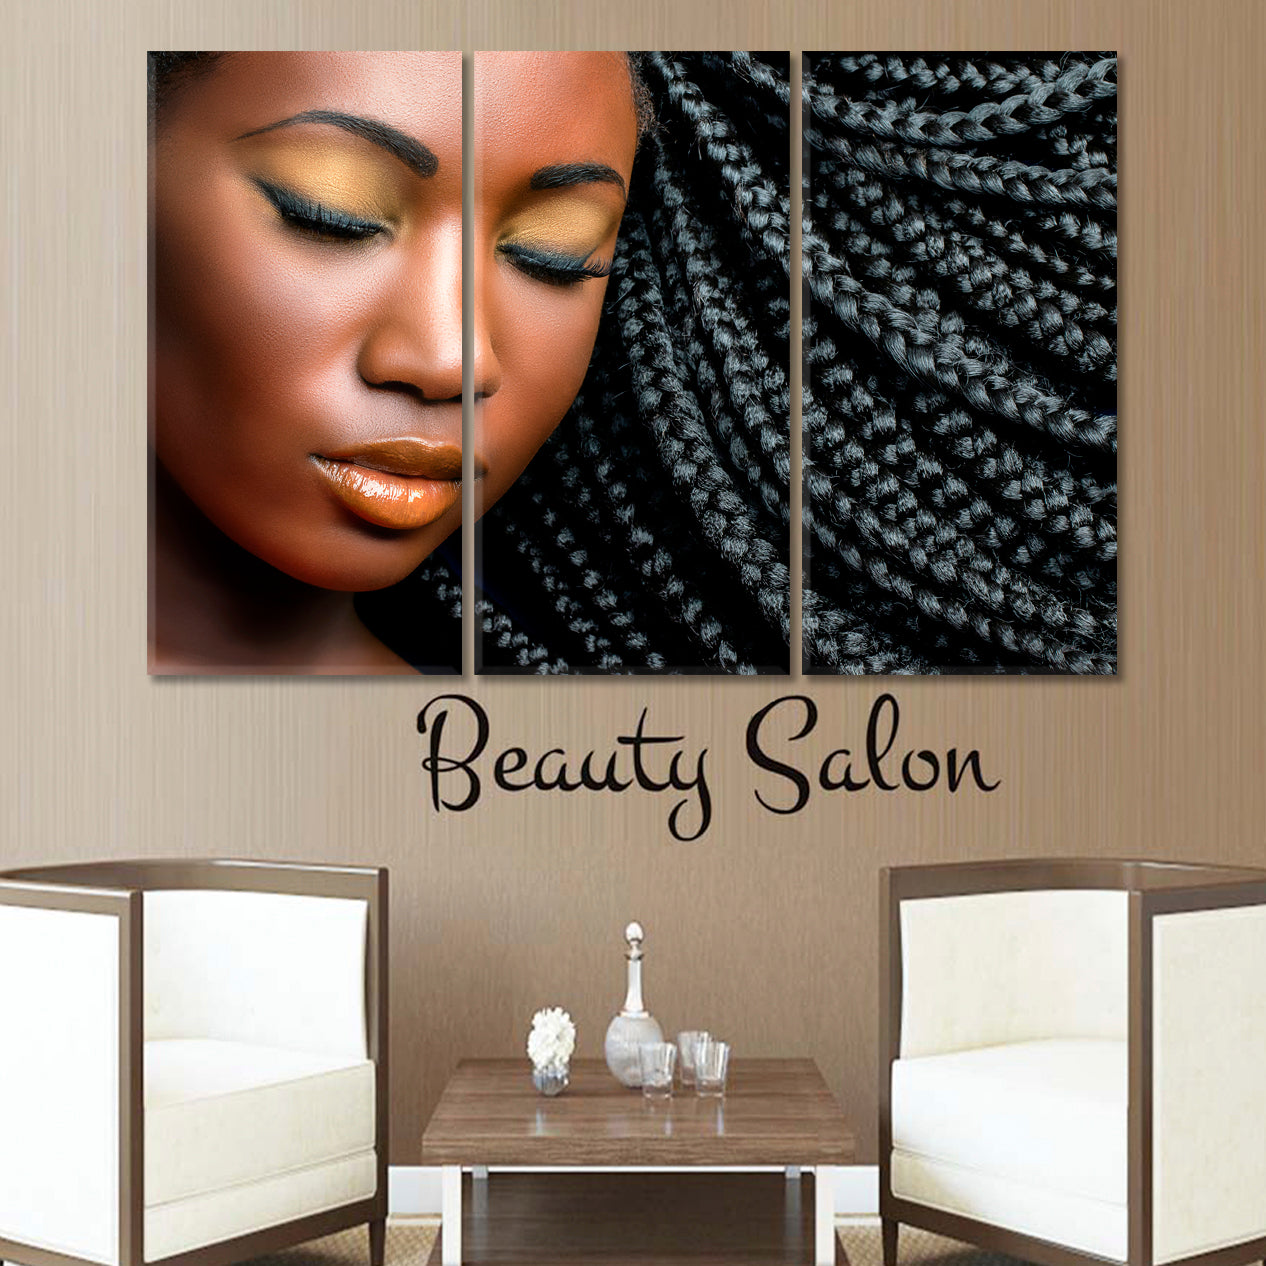 BEAUTY African Girl Professional Makeup Black Braided Hairstyle Beauty Salon Artwork Prints Artesty 3 panels 36" x 24" 